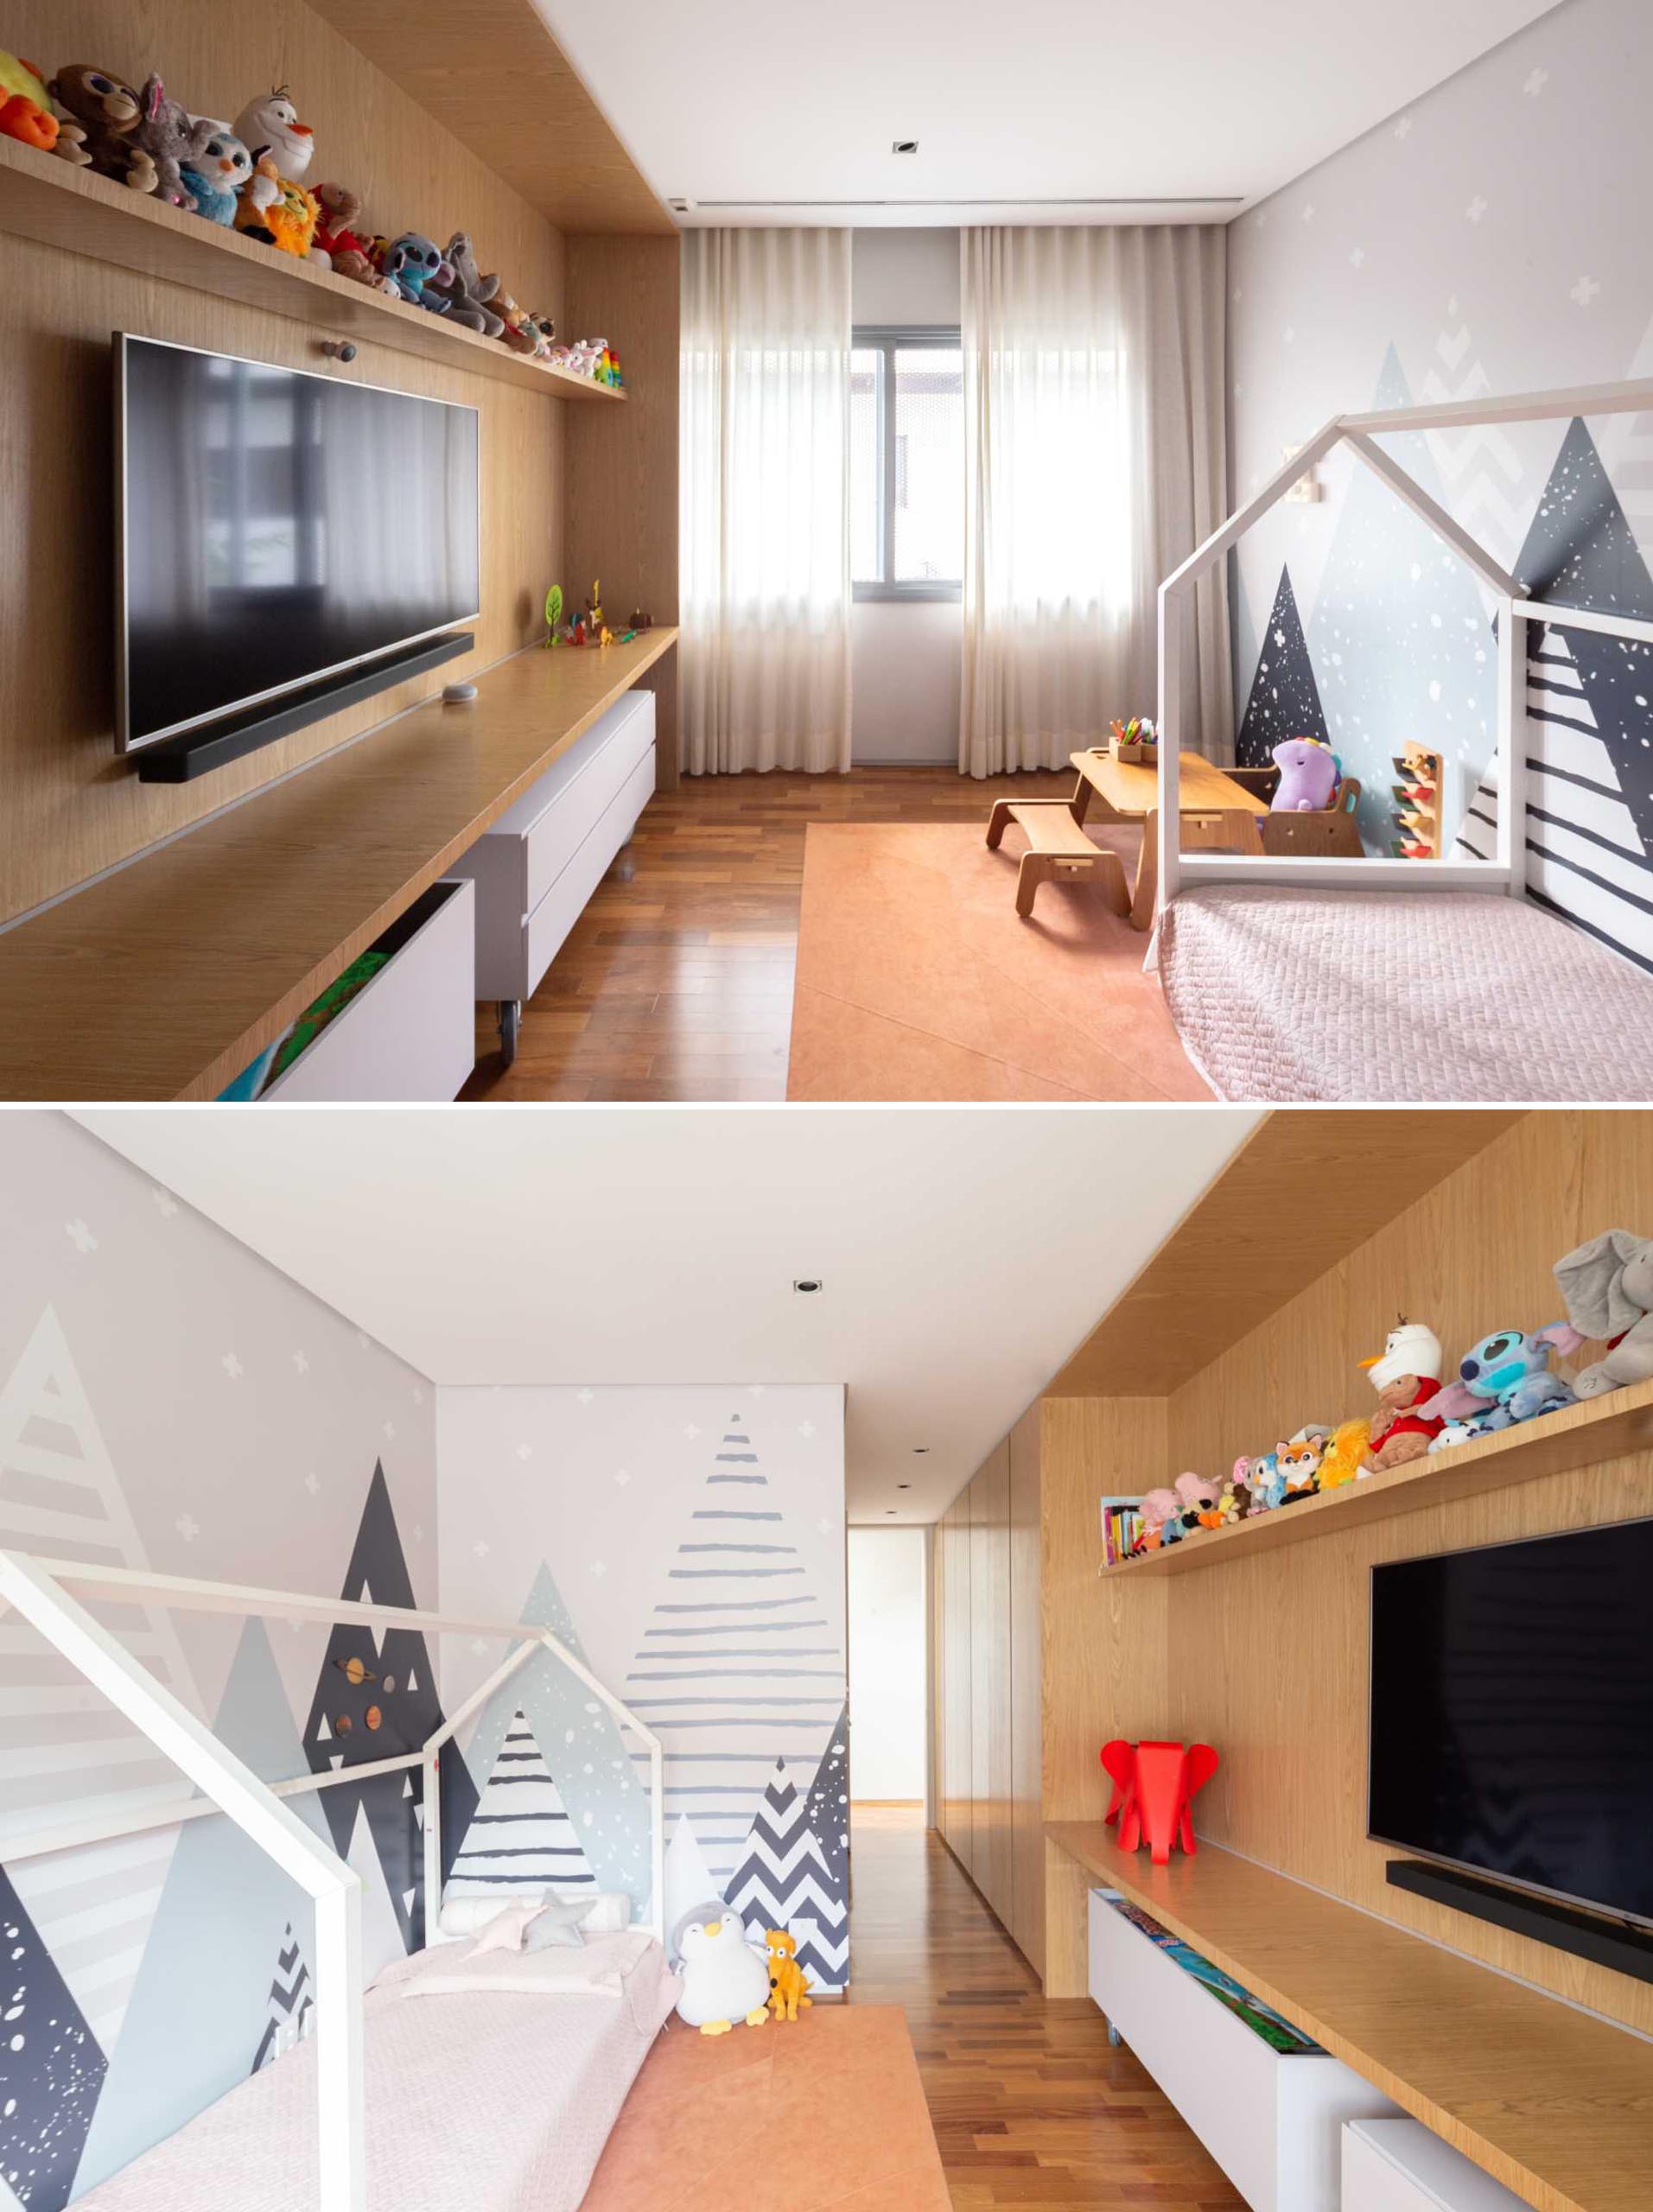 This kids bedroom includes a graphic mountain wall mural, while the opposite wall has a wood feature with a shelf for toys, a TV, and room for additional storage underneath.